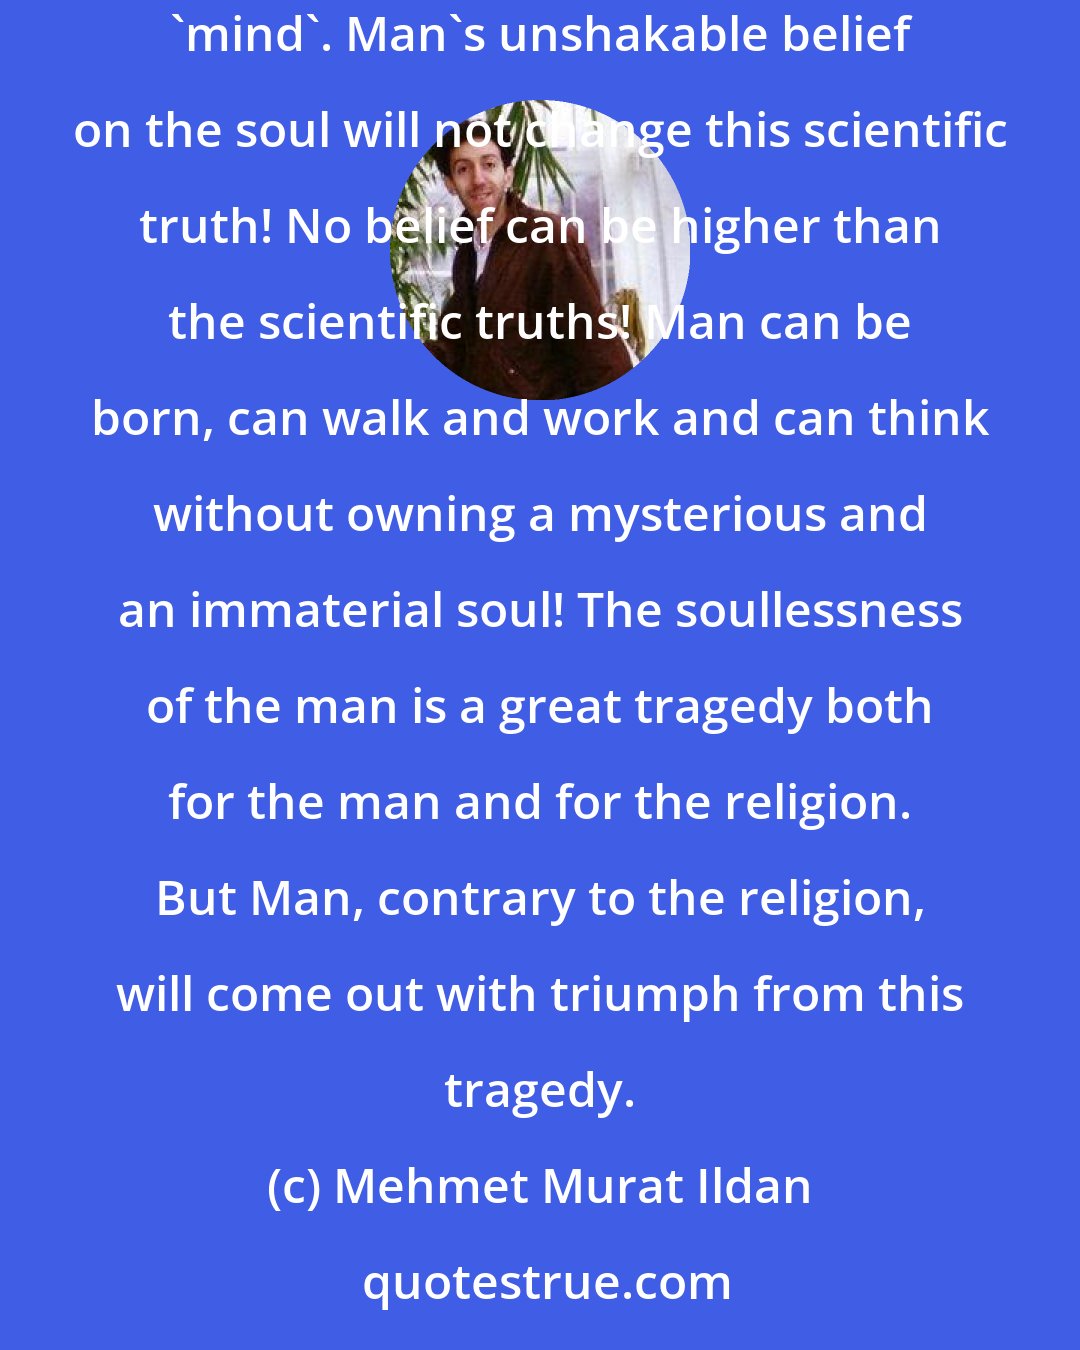 Mehmet Murat Ildan: It is always a great honour to mention a truth which has not become widespread yet. One of these truths is that man has no soul; he has only 'body' and 'mind'. Man's unshakable belief on the soul will not change this scientific truth! No belief can be higher than the scientific truths! Man can be born, can walk and work and can think without owning a mysterious and an immaterial soul! The soullessness of the man is a great tragedy both for the man and for the religion. But Man, contrary to the religion, will come out with triumph from this tragedy.